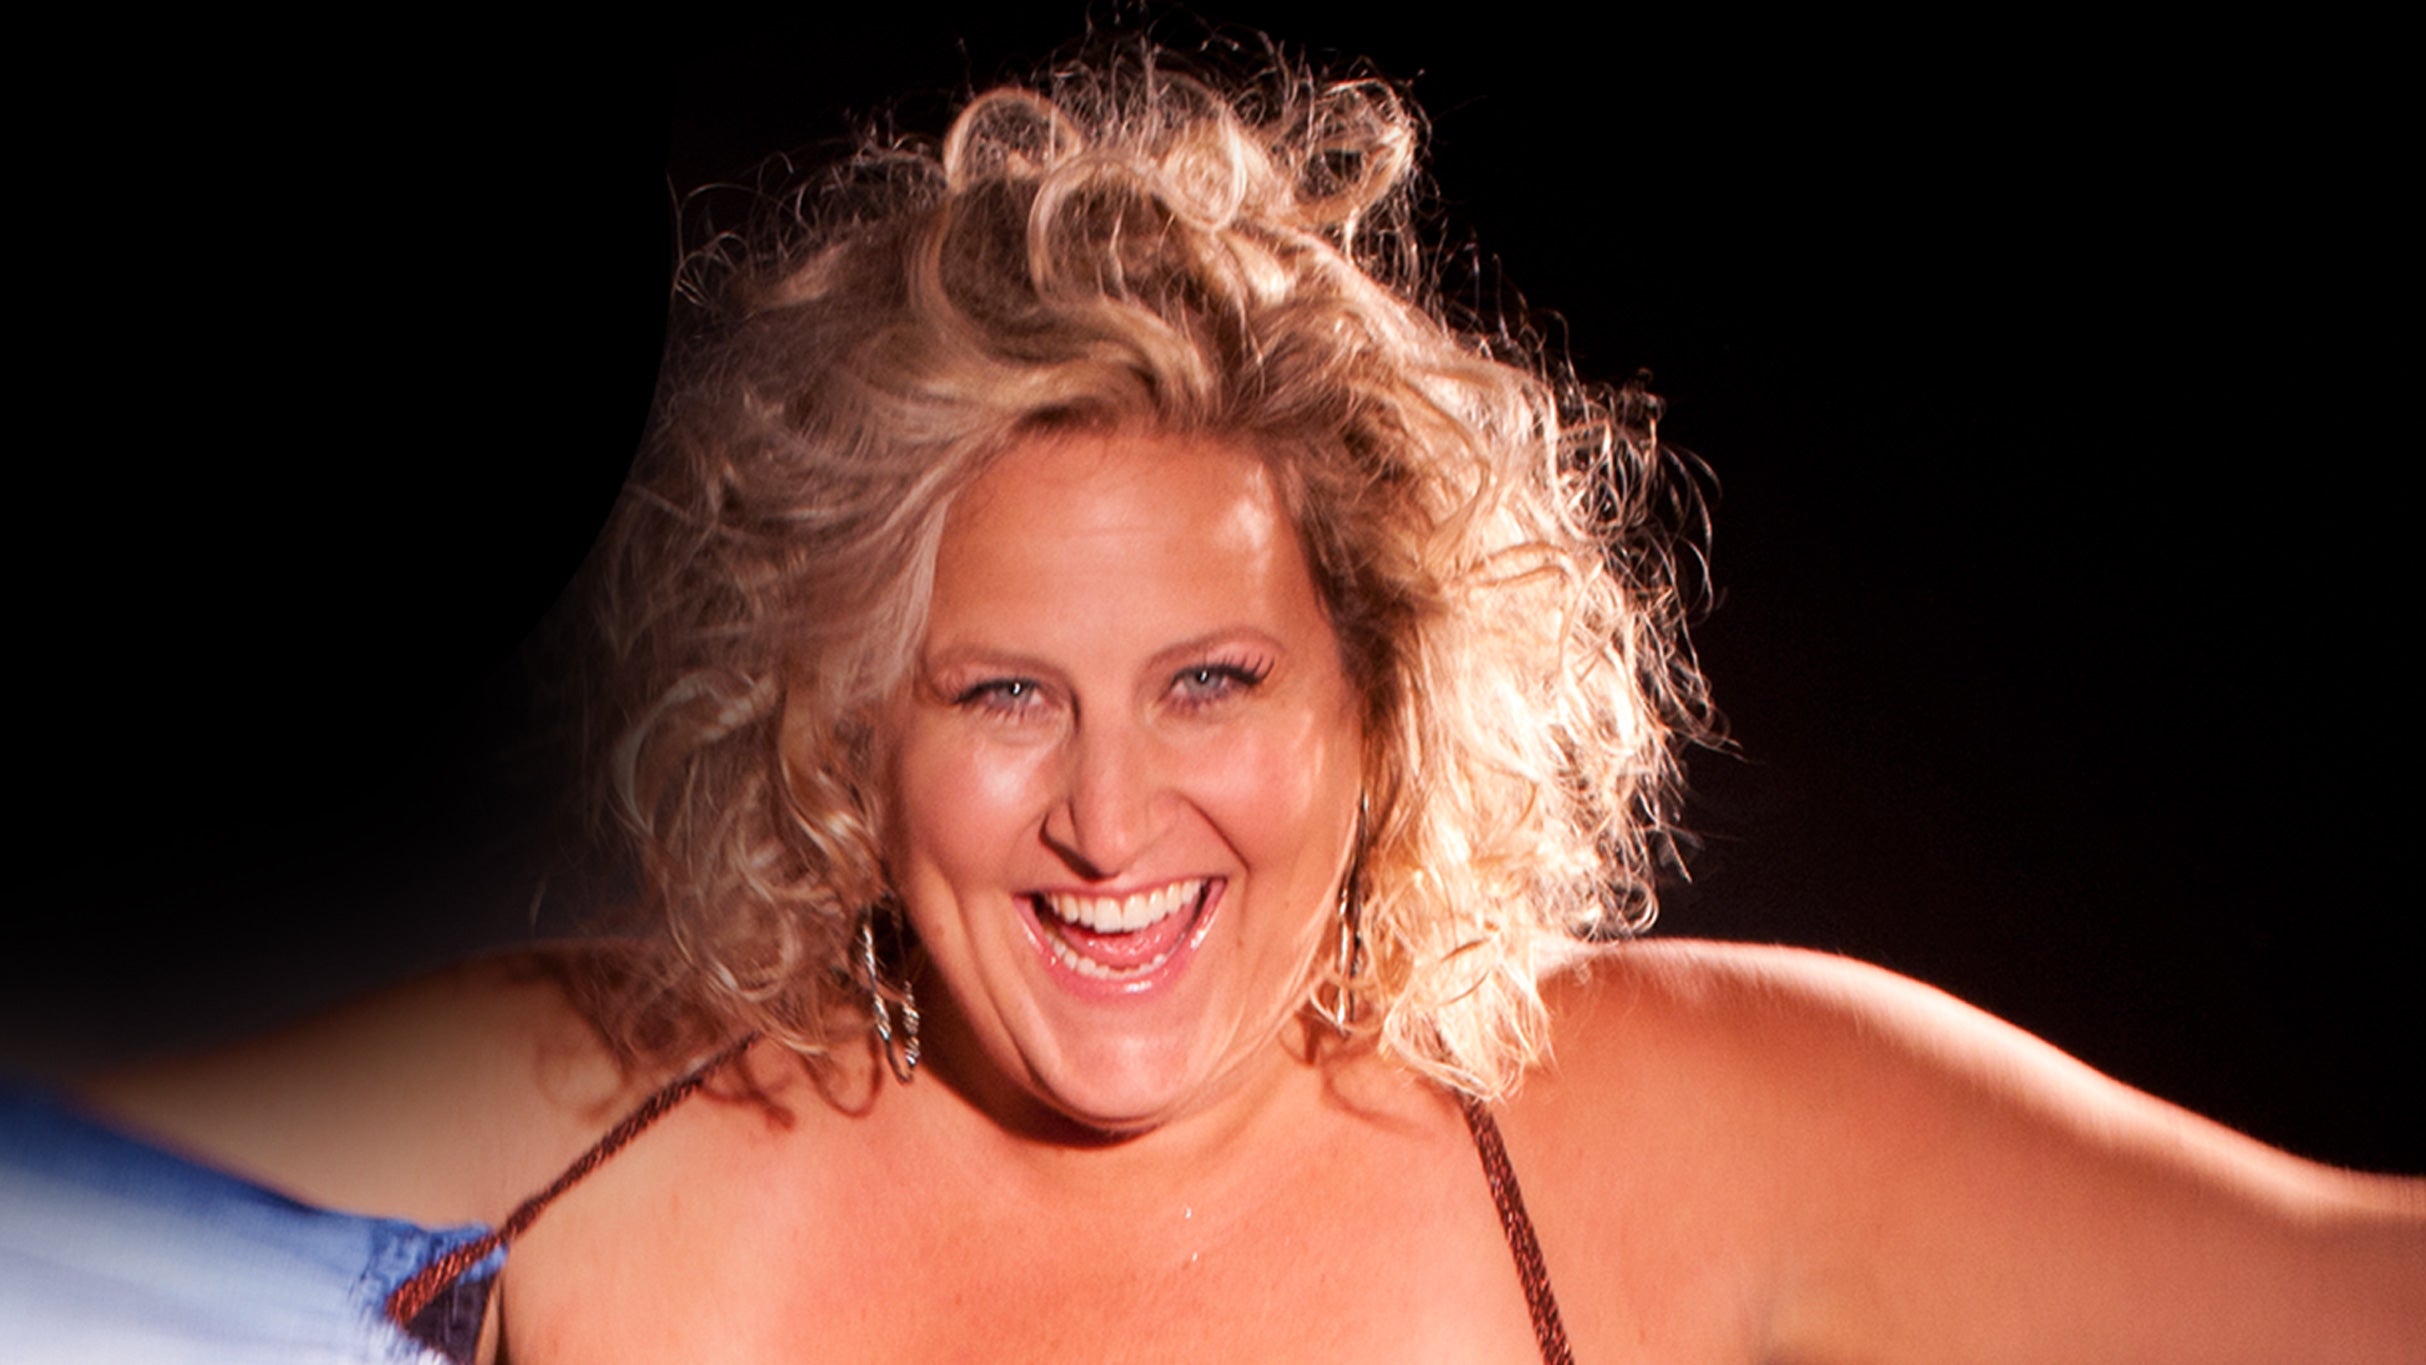 exclusive presale code for Bridget Everett and The Tender Moments advanced tickets in New York at Beacon Theatre